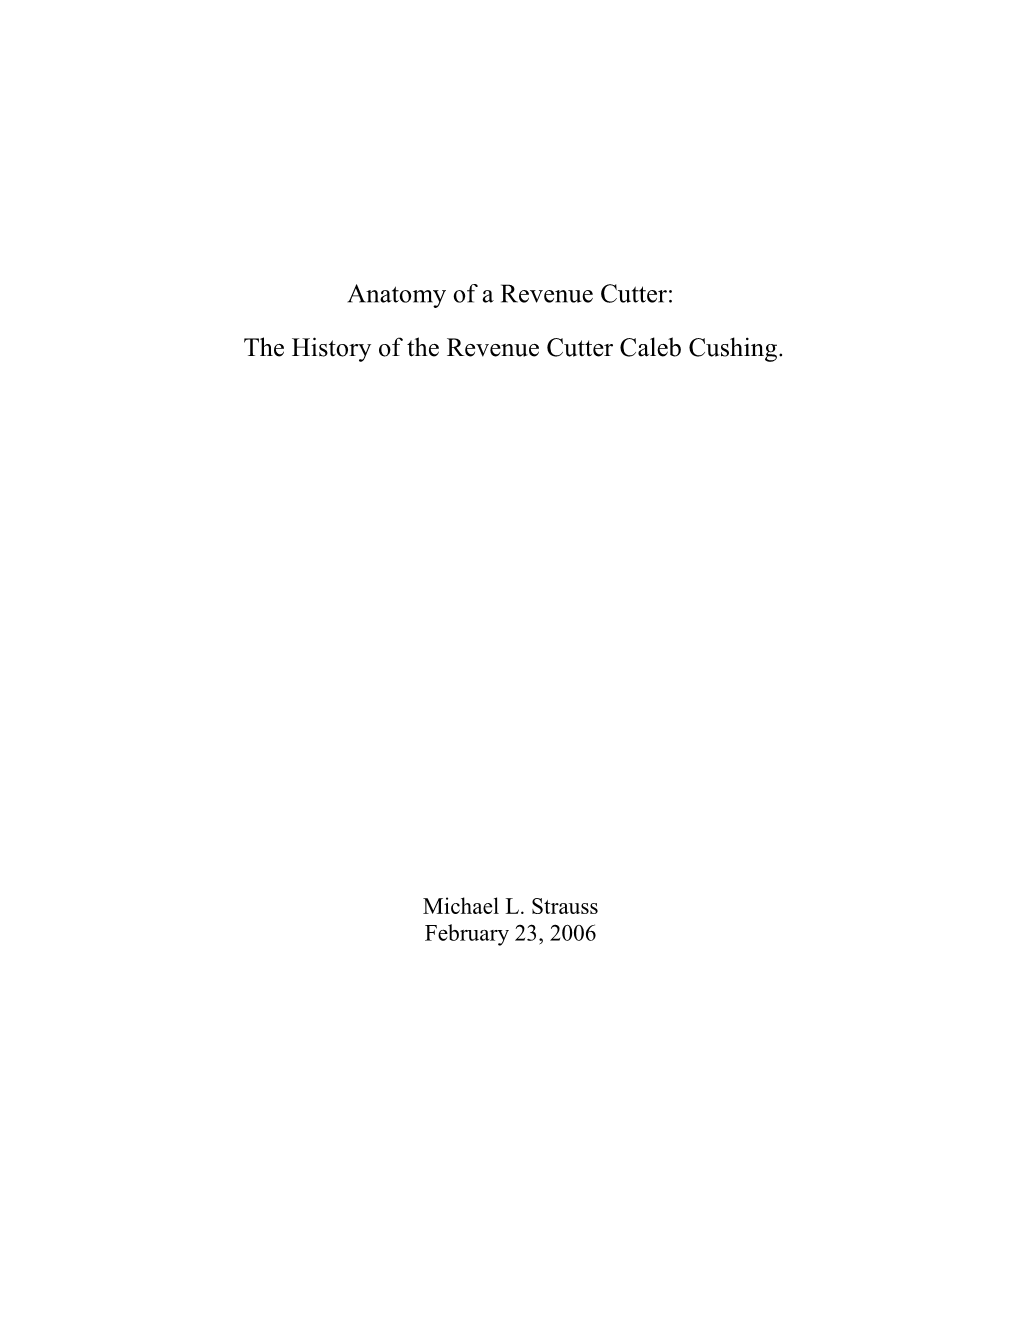 The History of the Revenue Cutter Caleb Cushing